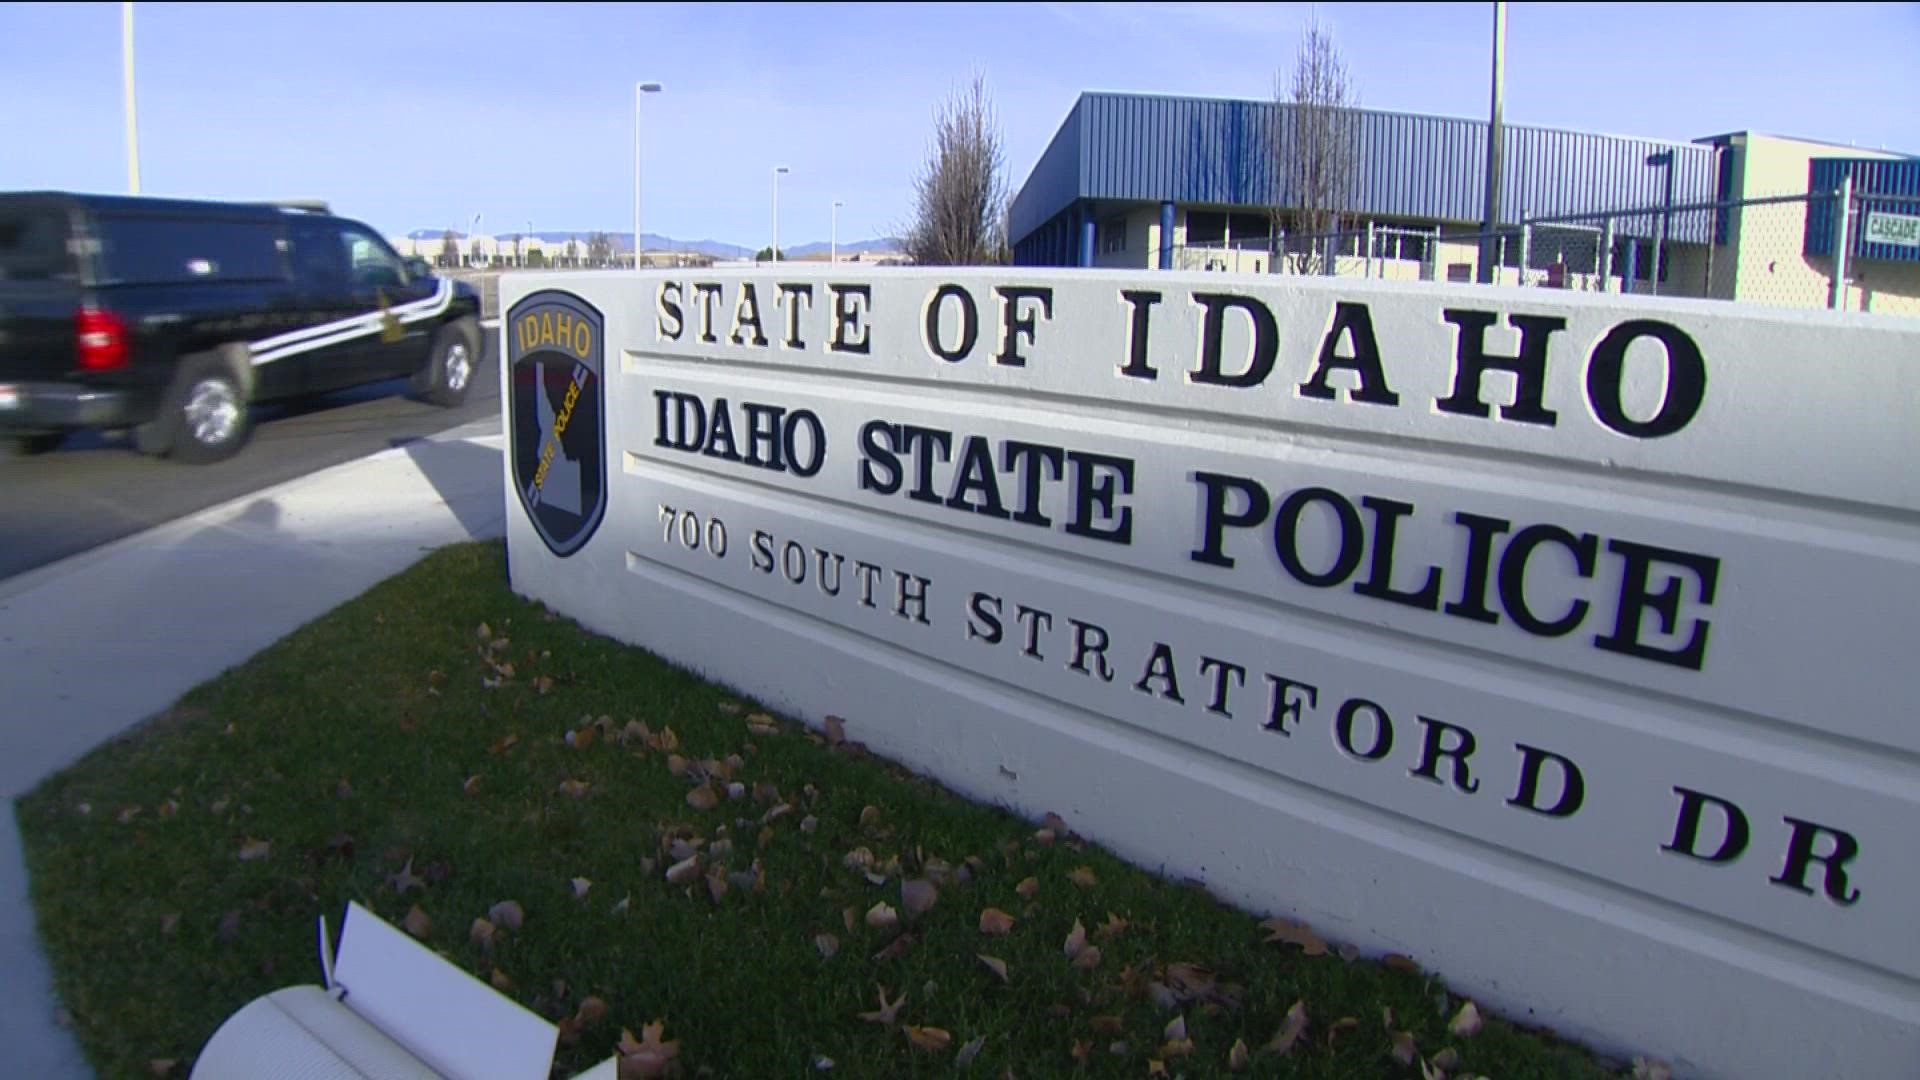 Idaho's Peace Officer Standards and Training is the accrediting body for police standards and training for the state.